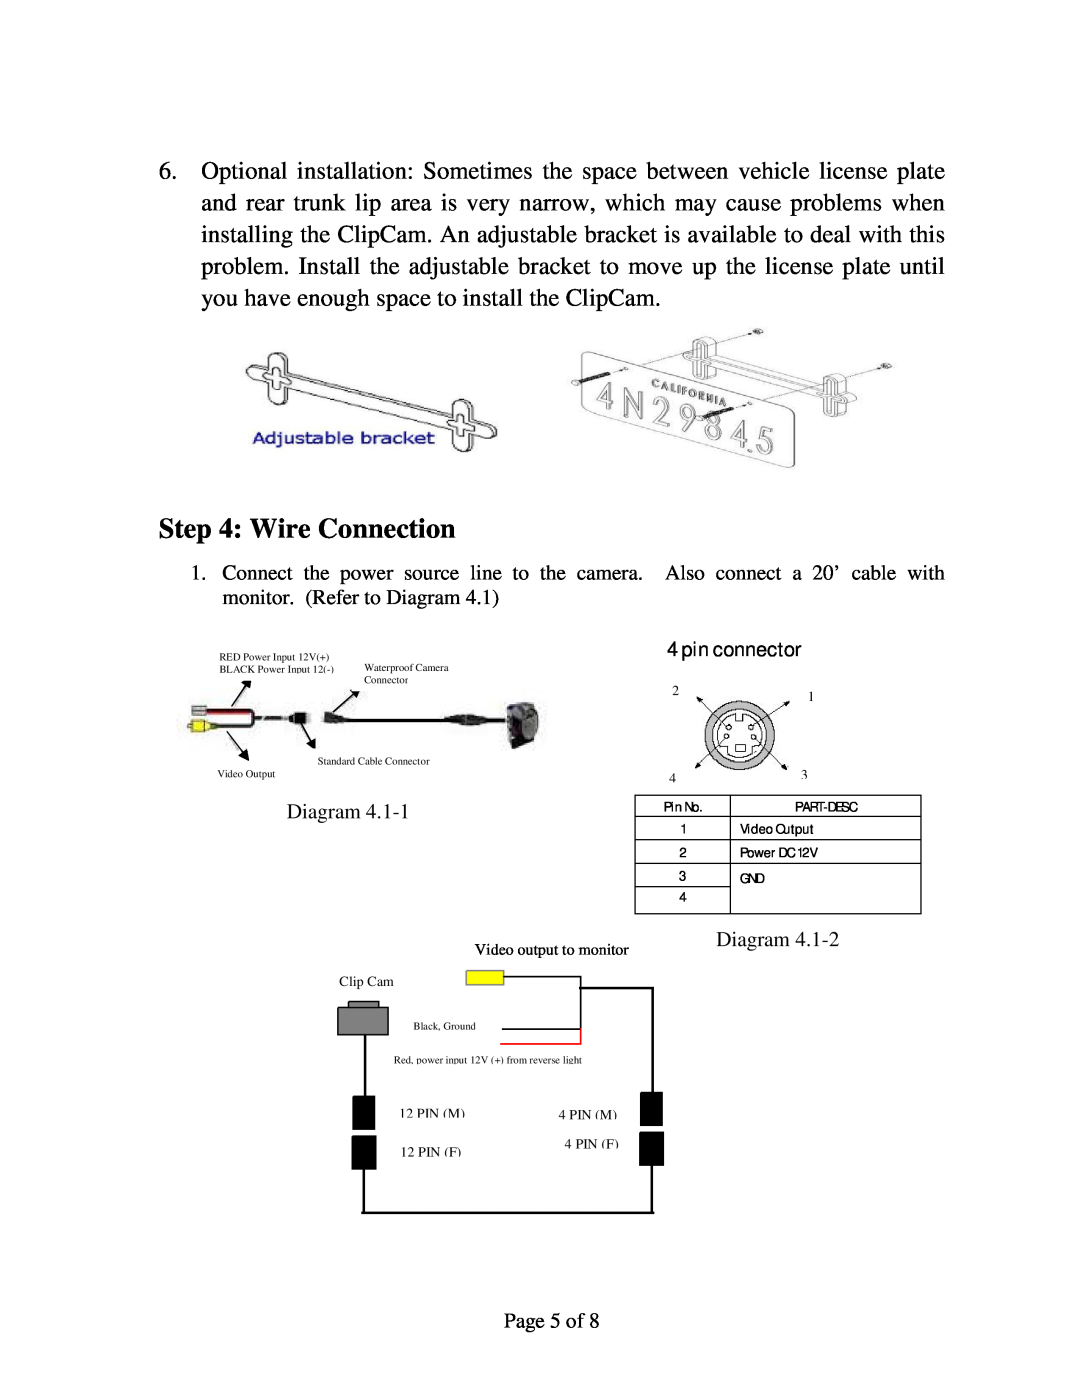 Crimestopper Security Products SV-6400 installation manual Wire Connection, Diagram, Page 5 of 